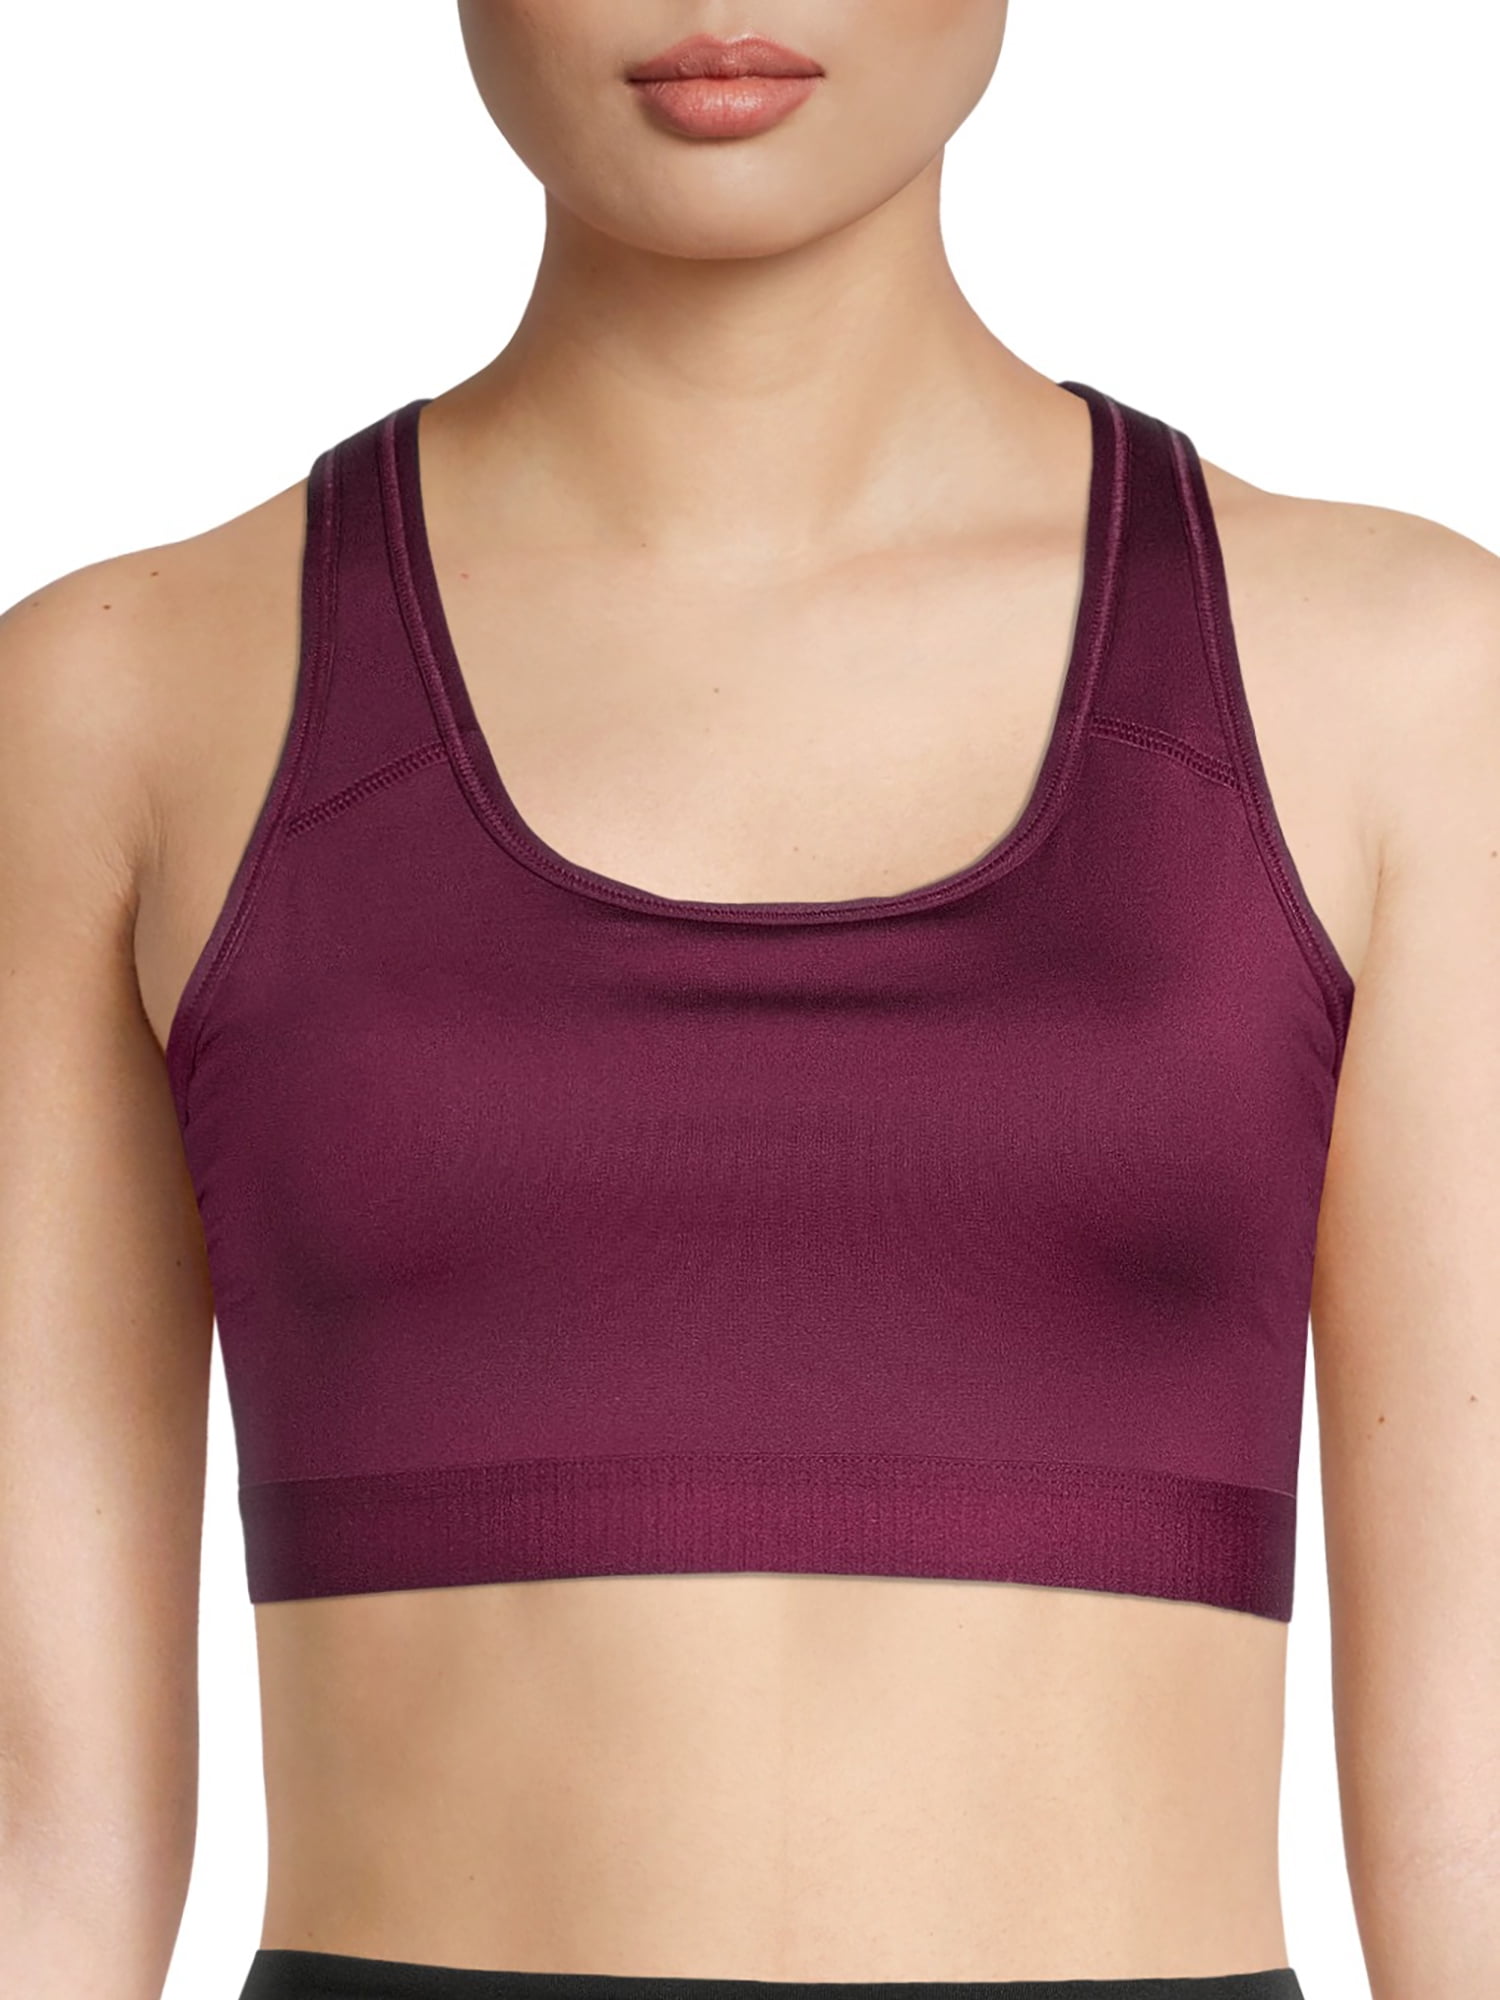 Avia Ladies Racerback Black Sports Bra with Med Support & Compression Teen  SMALL